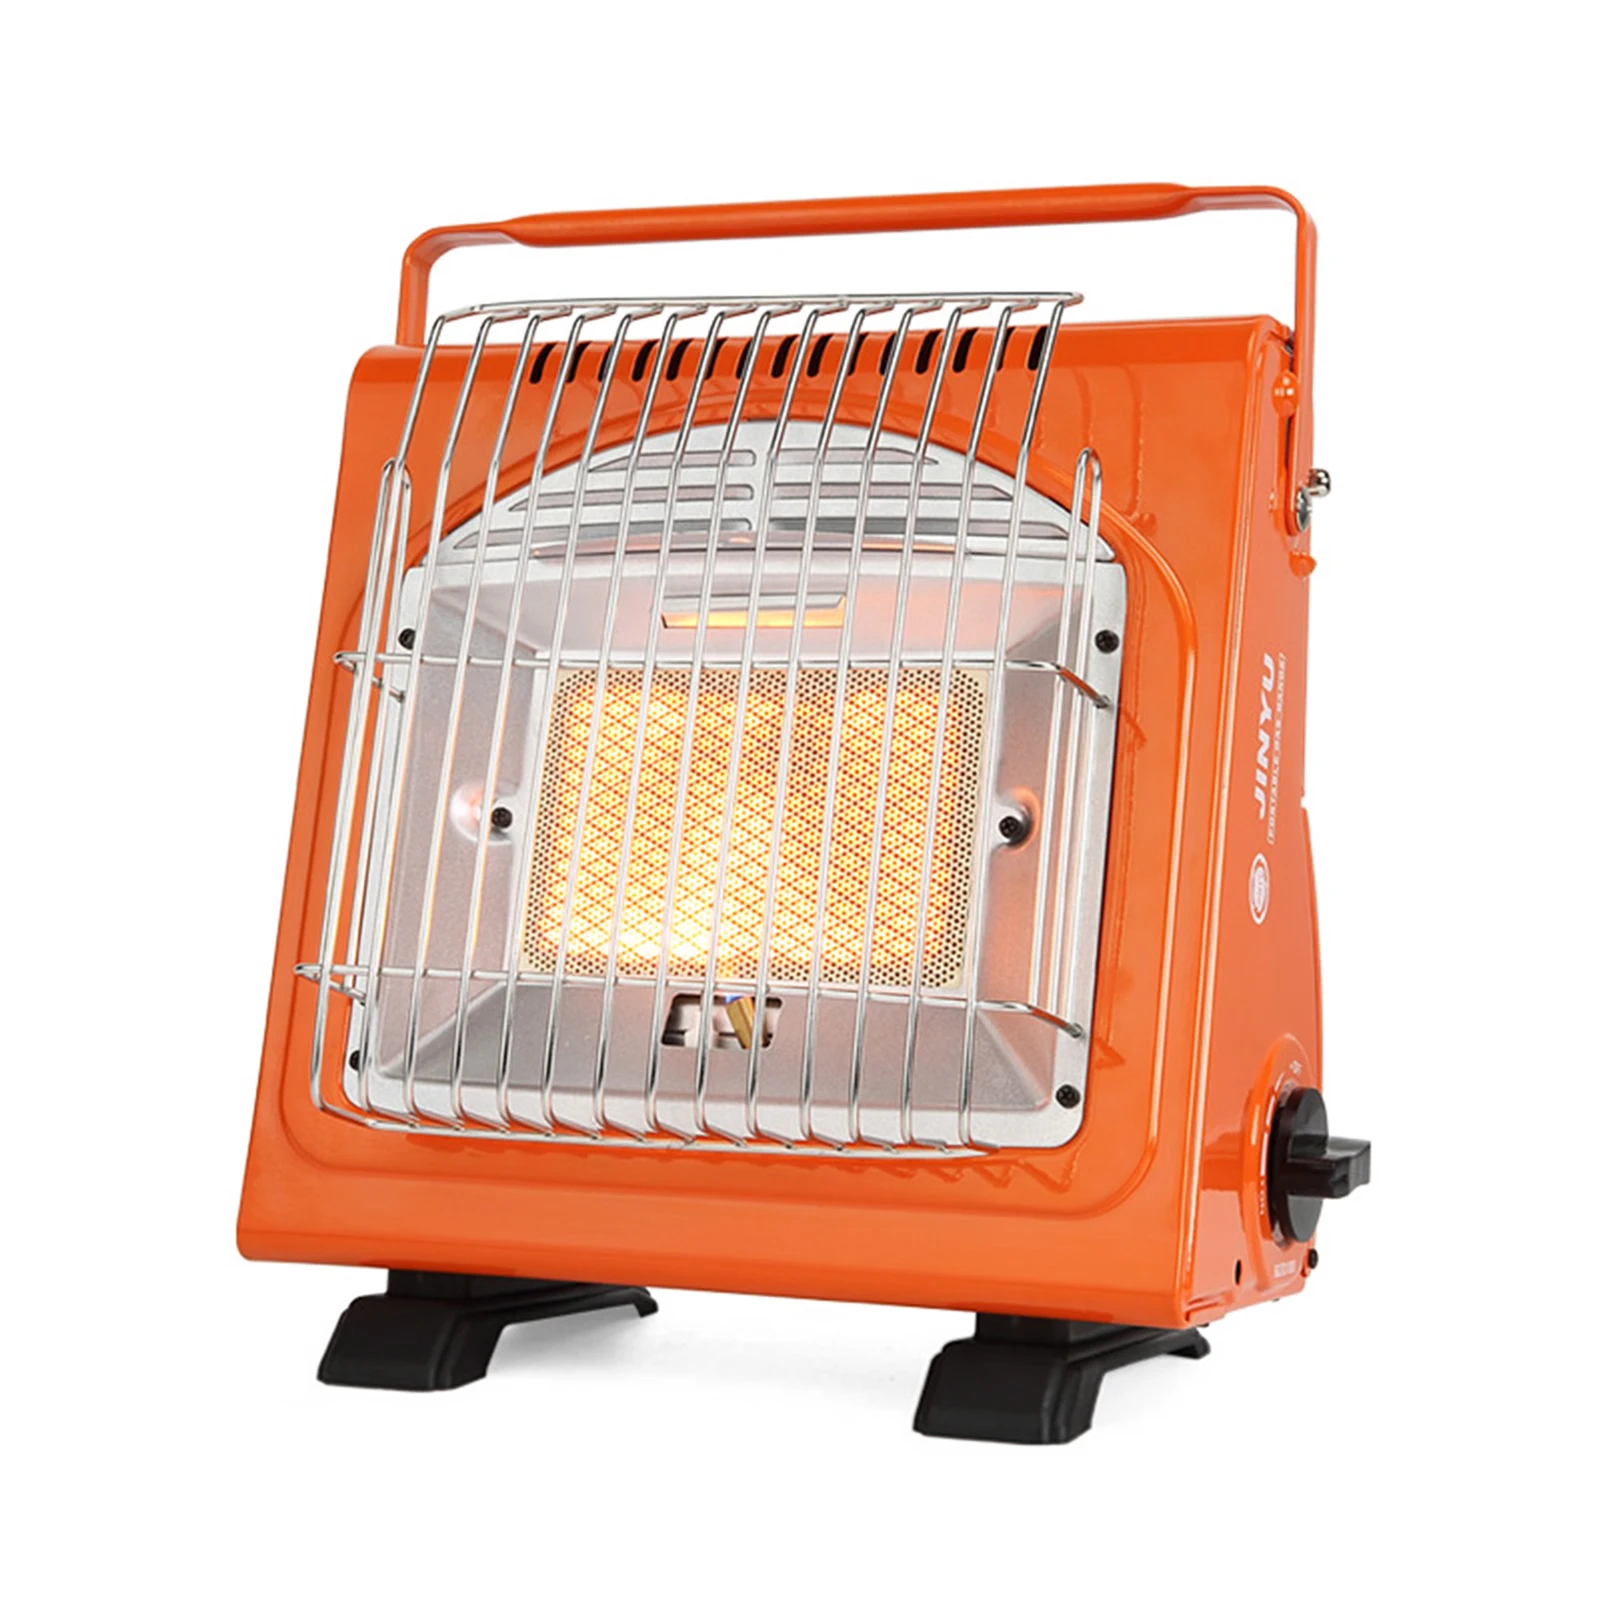 

Outdoors 1.7KW Portable Space Heater Multifunctional Gas Heater Ceramic Heater Adjustable Iron Stove Heater for Camping Tent